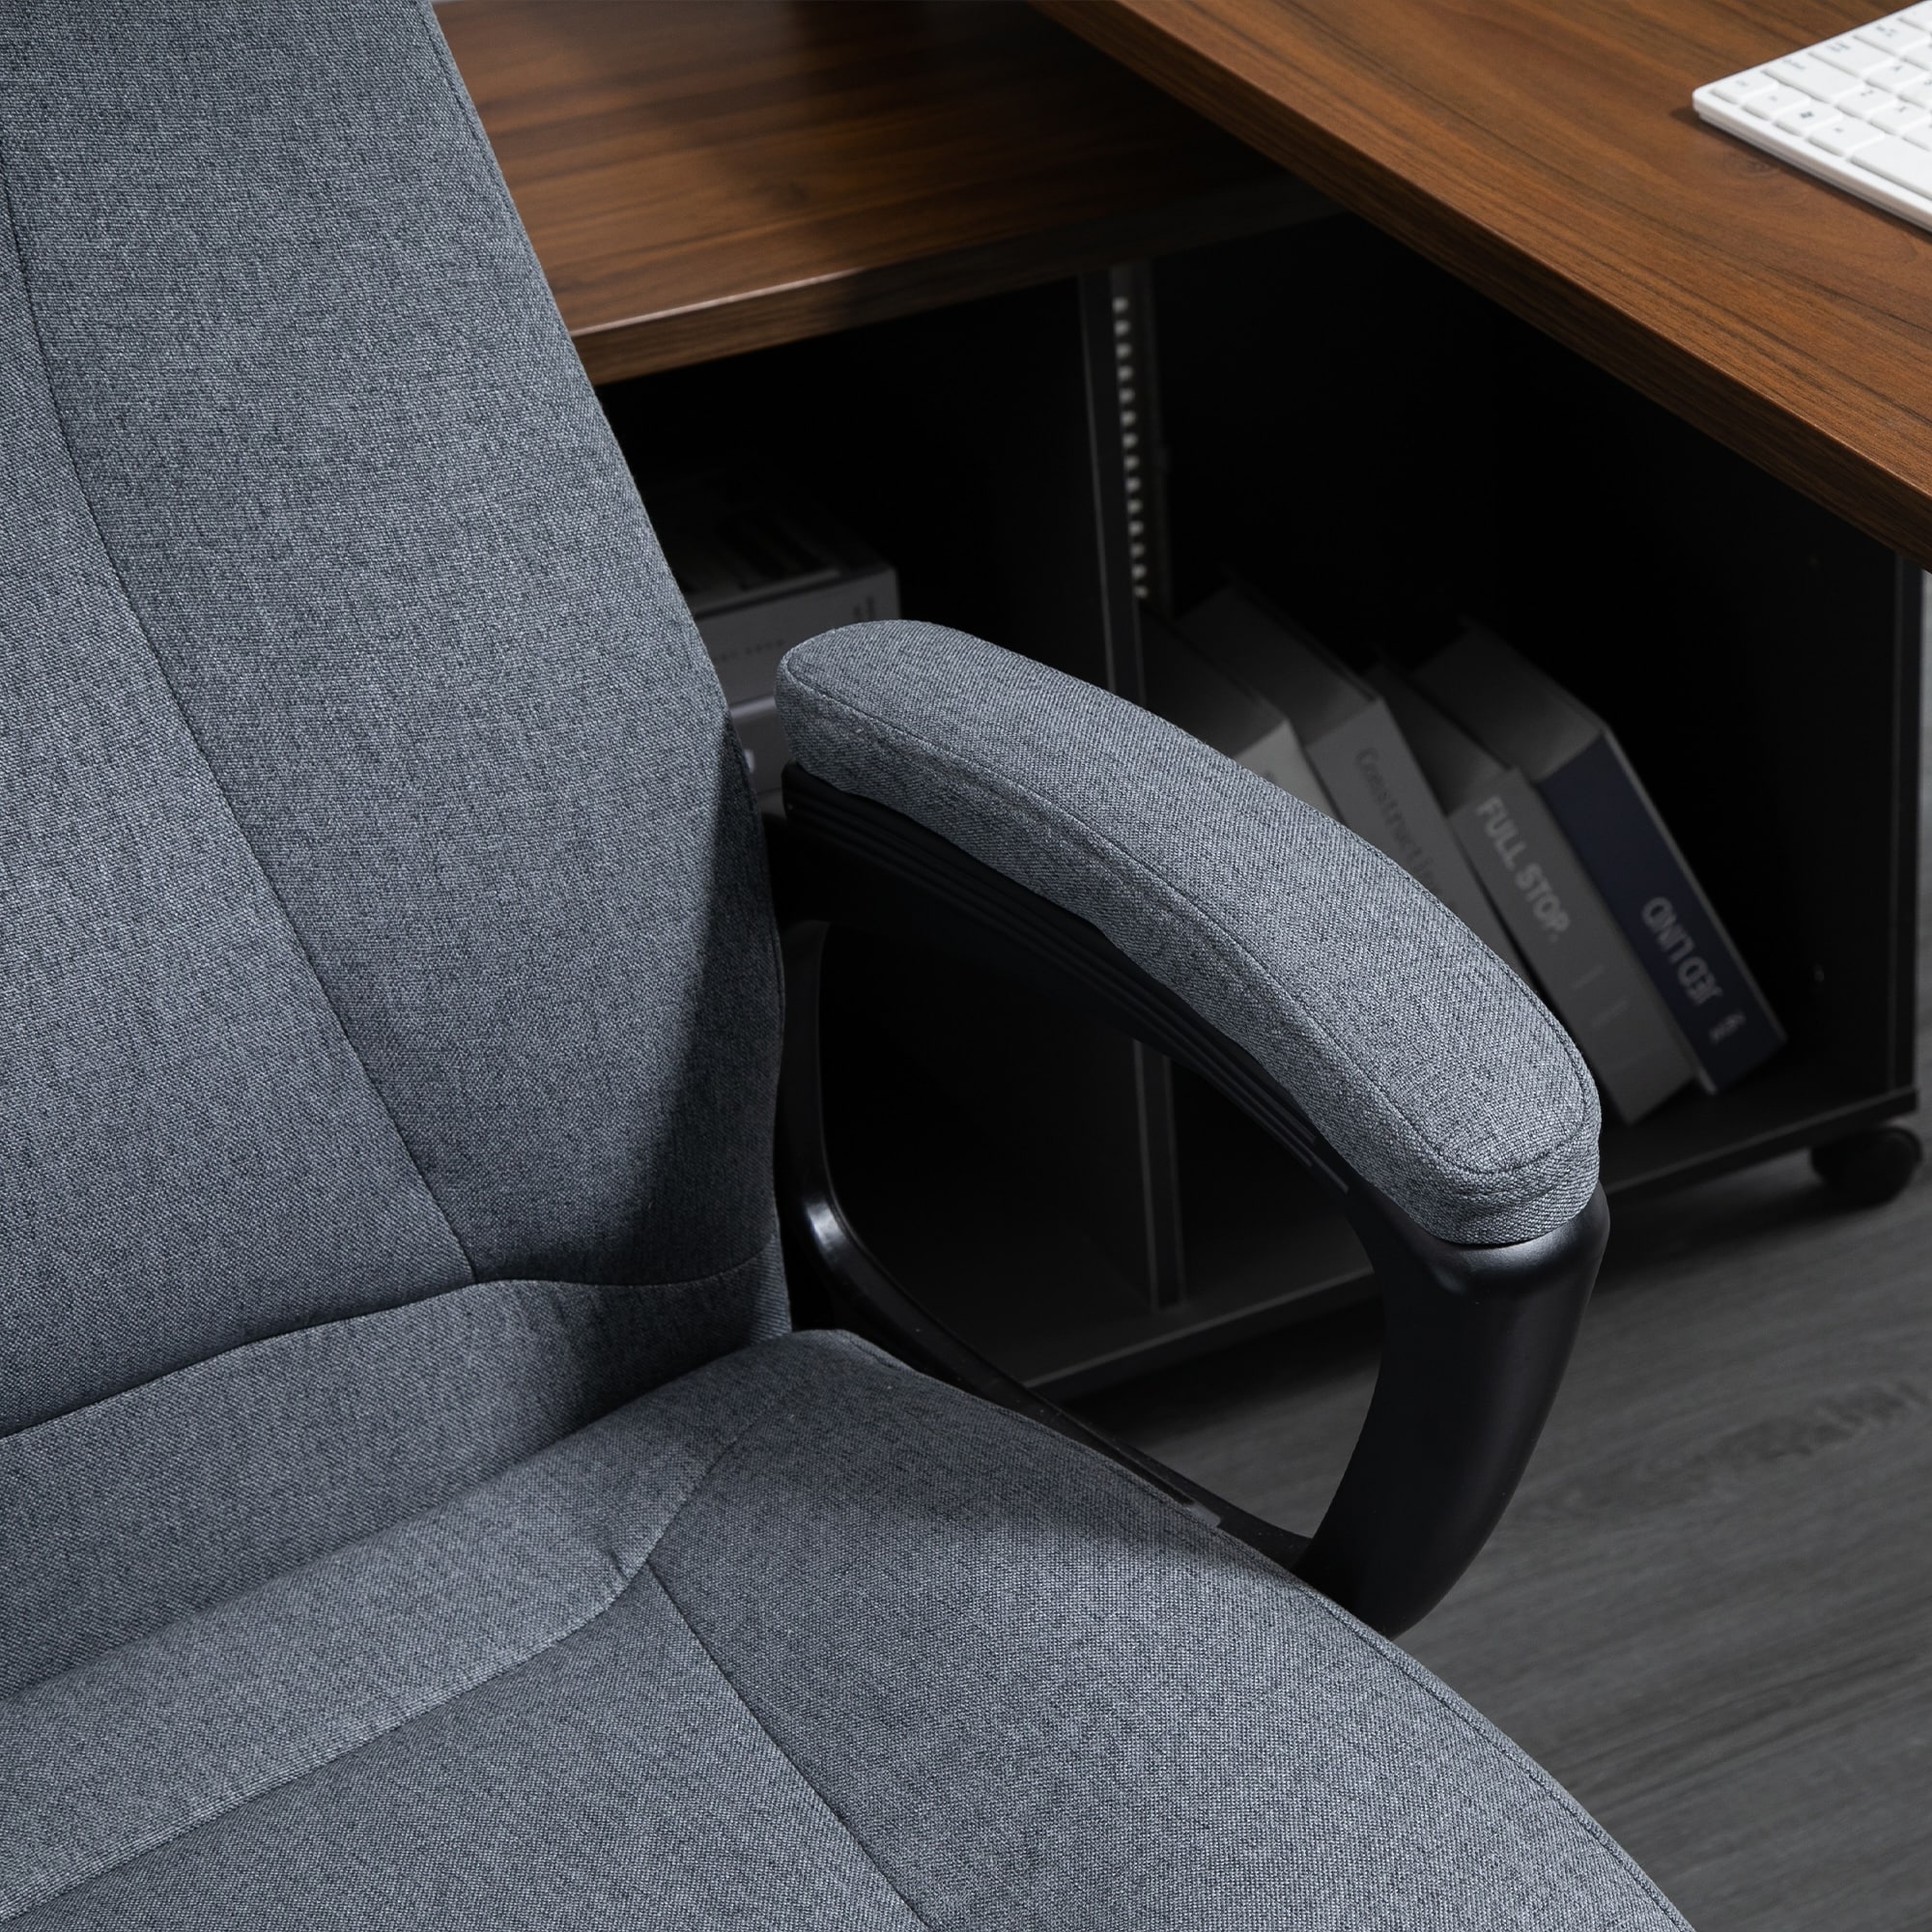 https://ak1.ostkcdn.com/images/products/is/images/direct/01620af70b7559a703ebf75957fd6086ee93d752/Vinsetto-Ergonomic-Office-Chair-Adjustable-Height-Linen-Fabric-Rocker-360-Swivel-Task-Seat%2C-Grey.jpg